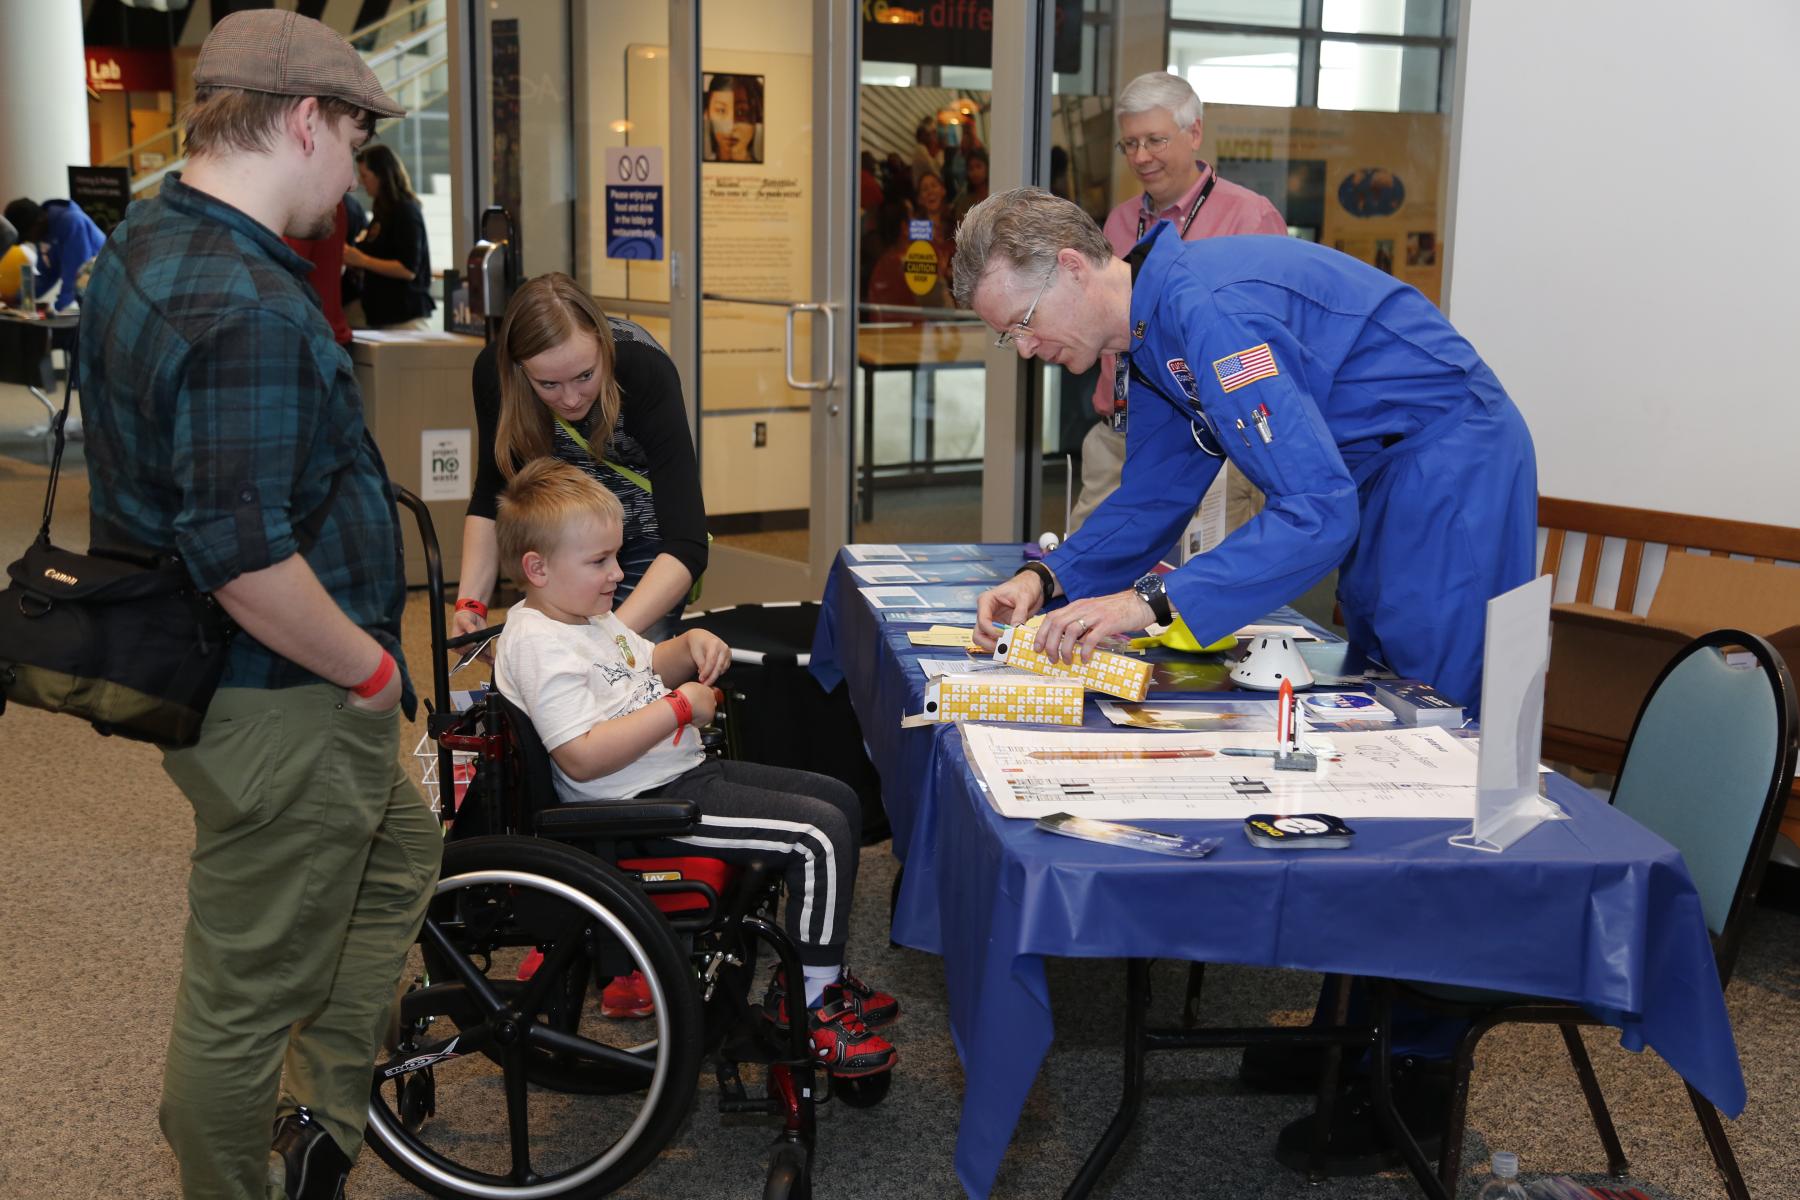 Solar System Ambassador facilitating an activity at an Earth and Space event